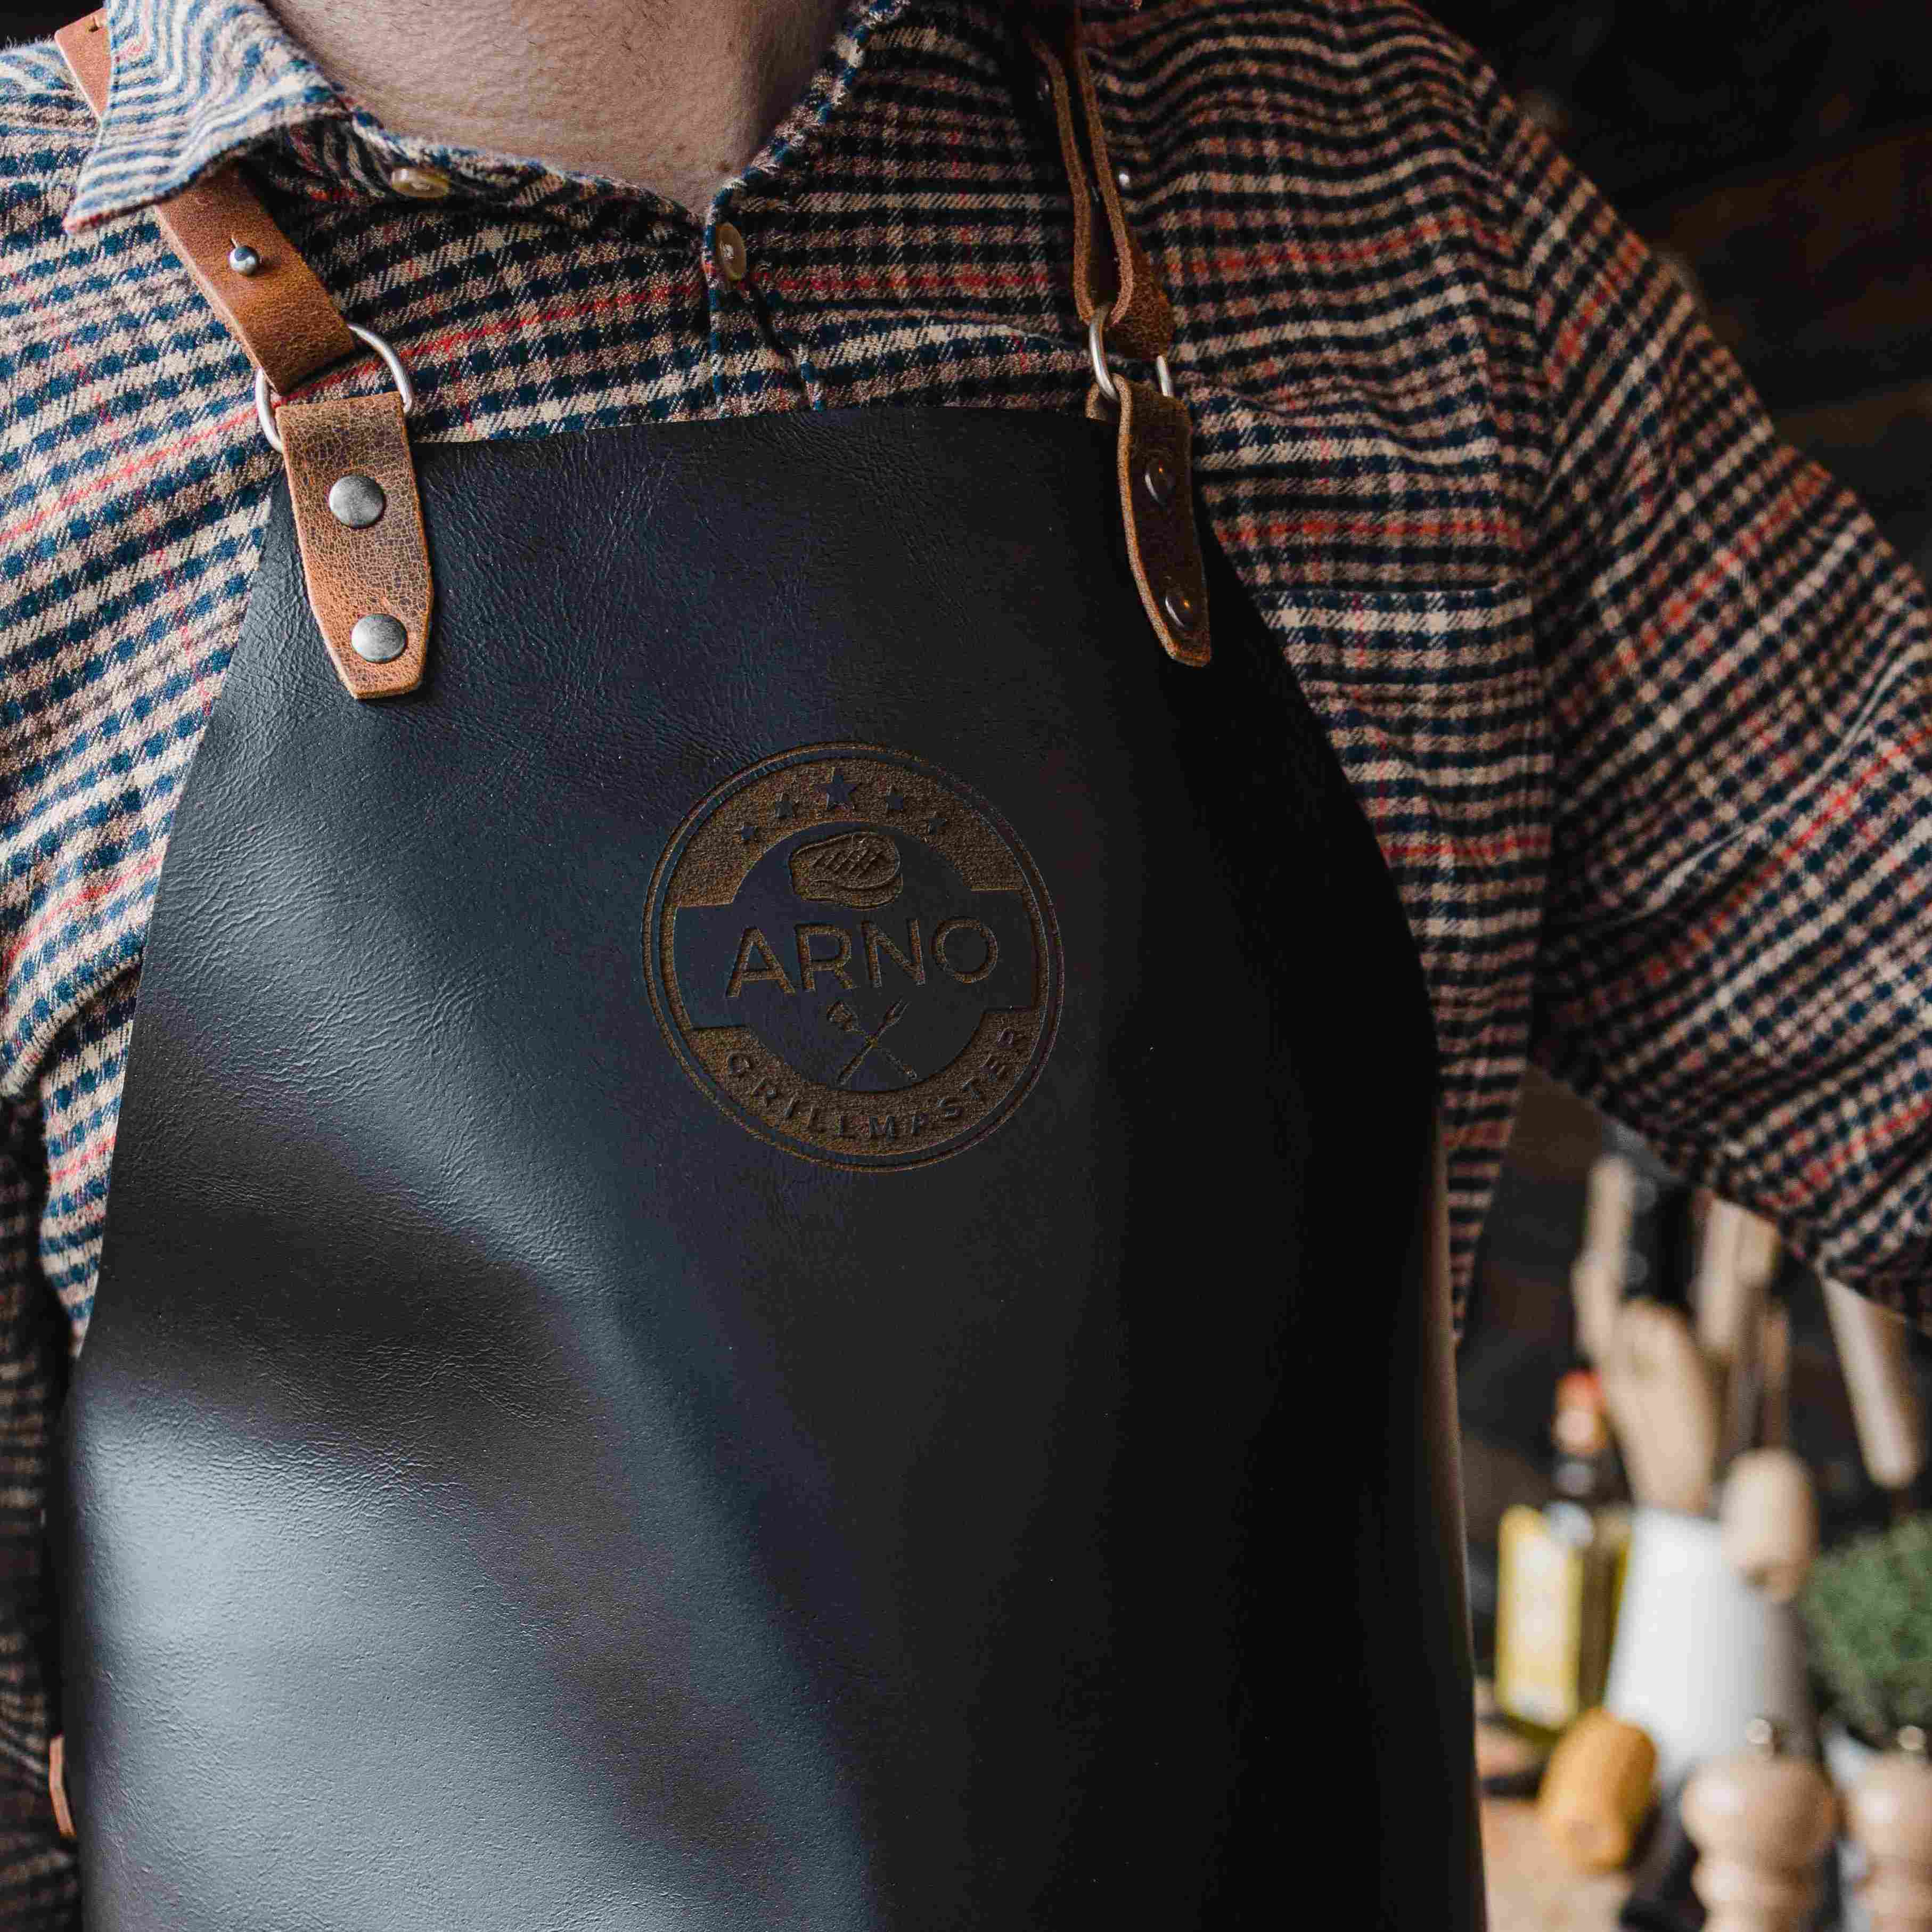 Handmade Leather Cross Back Apron For women With Pockets BBQ Chef Cooking  Gifts